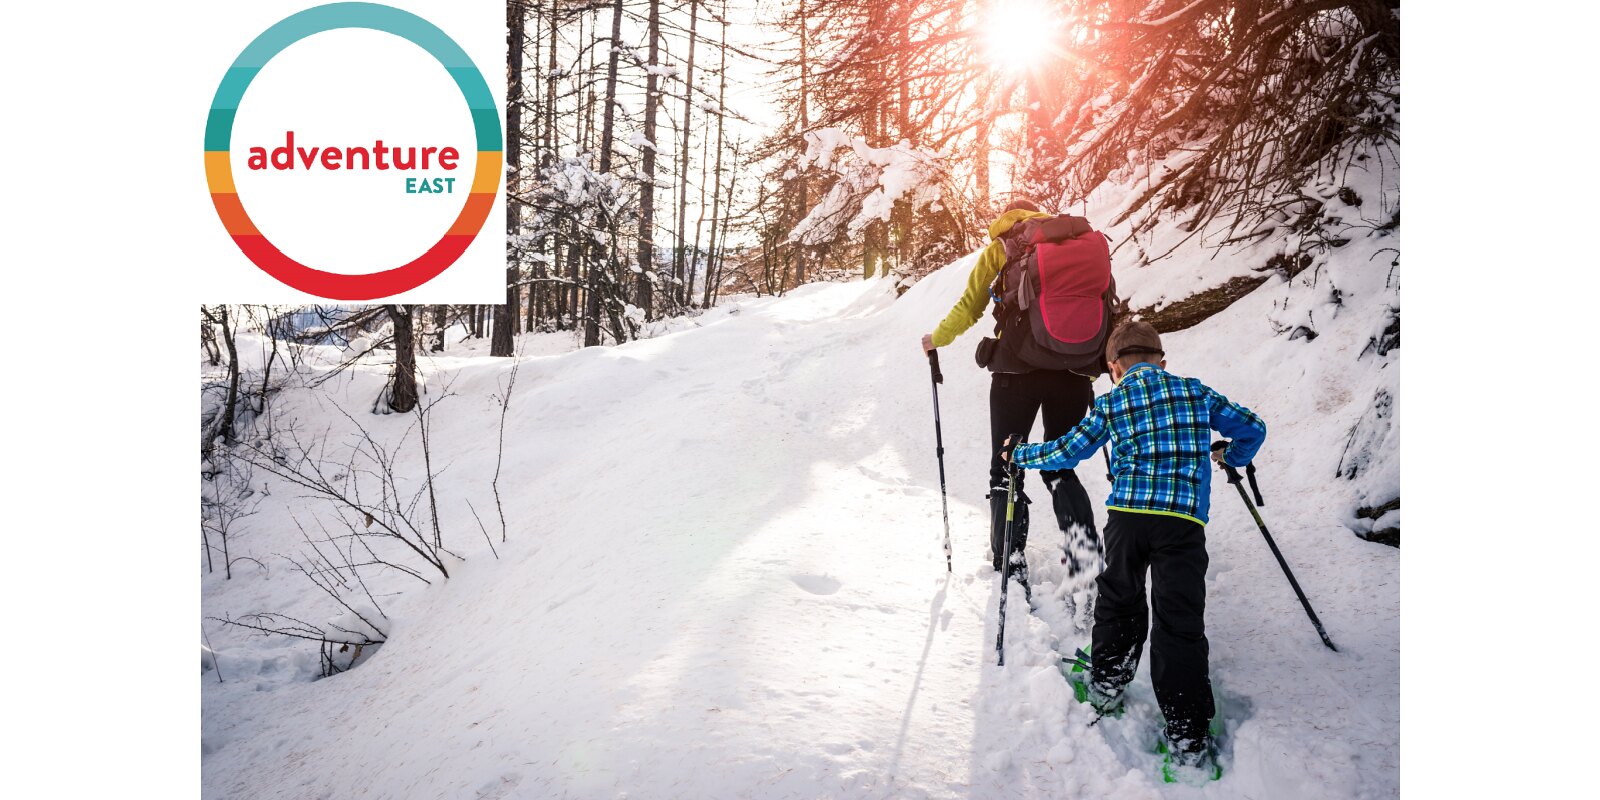 Photograph of parent and child snowshoeing with "Adventure East" logo overlay.